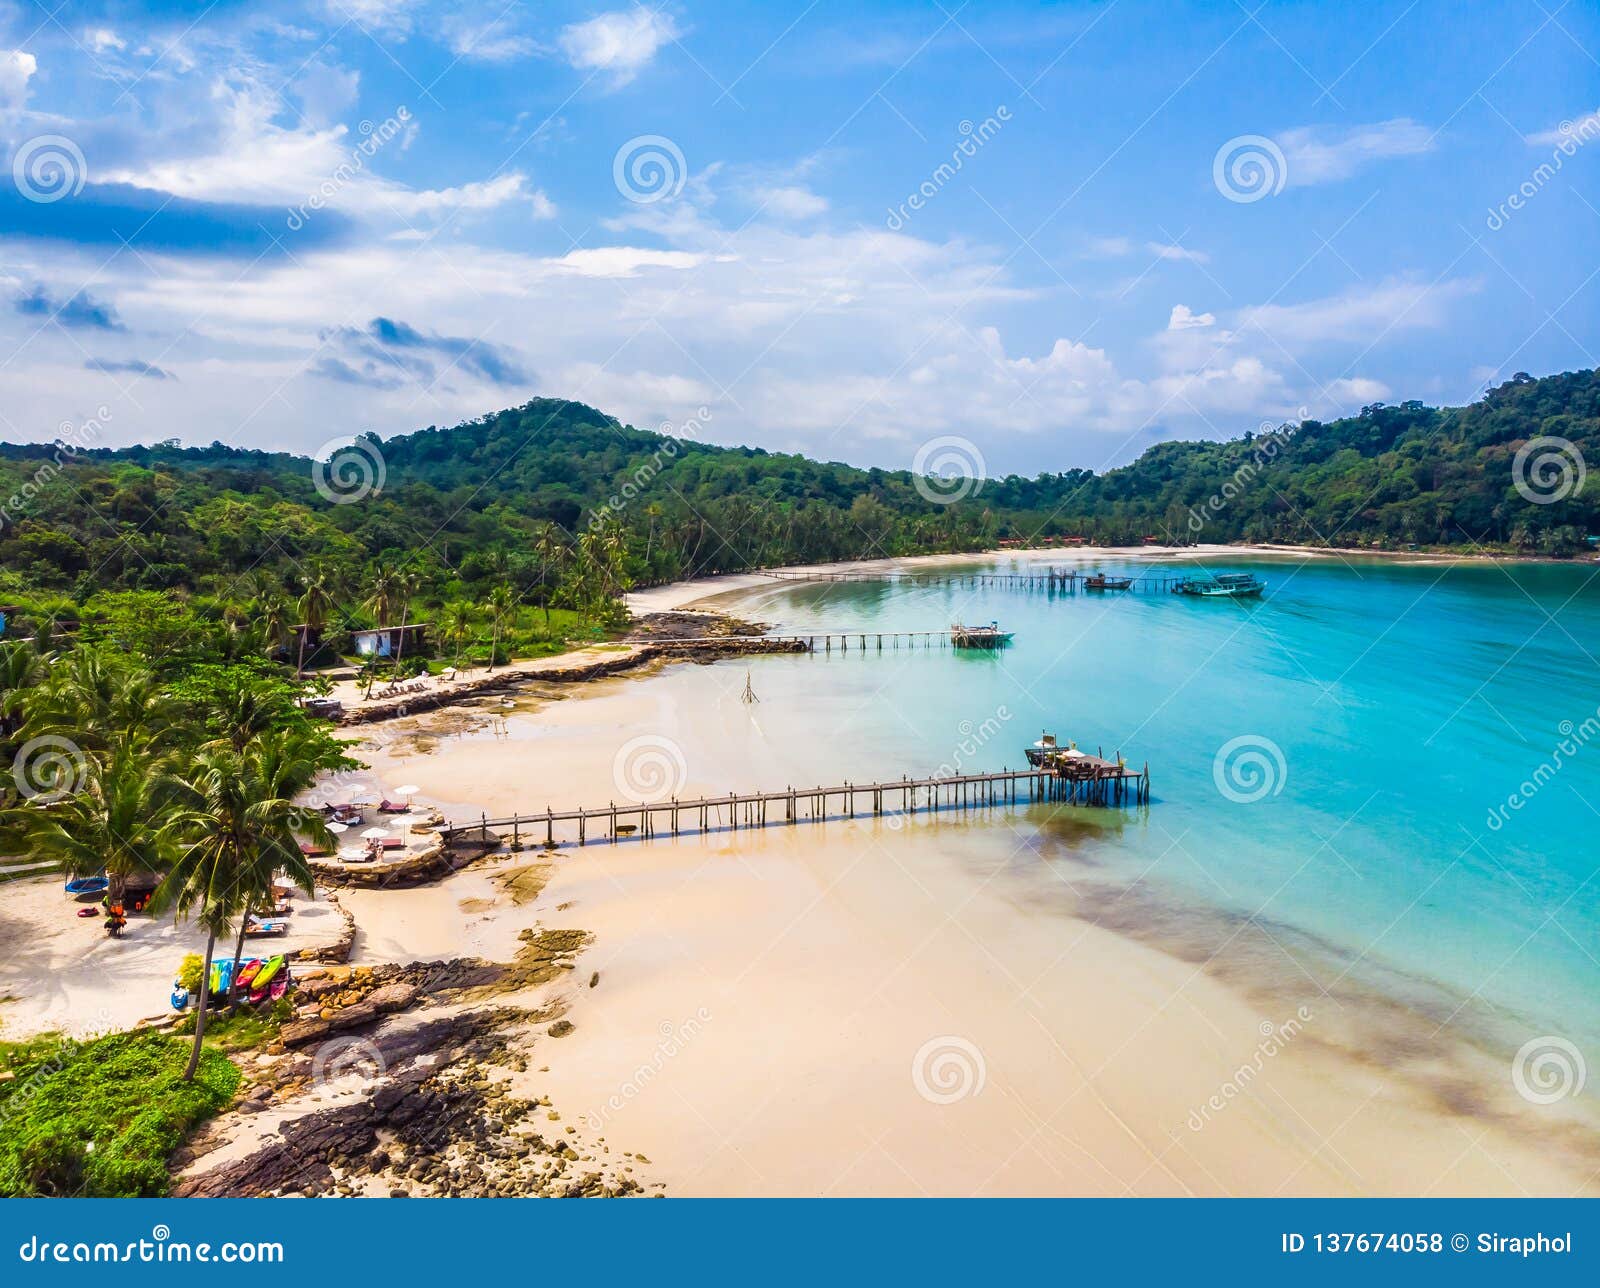 Beautiful Aerial View Of Beach And Sea With Coconut Palm Tree Stock